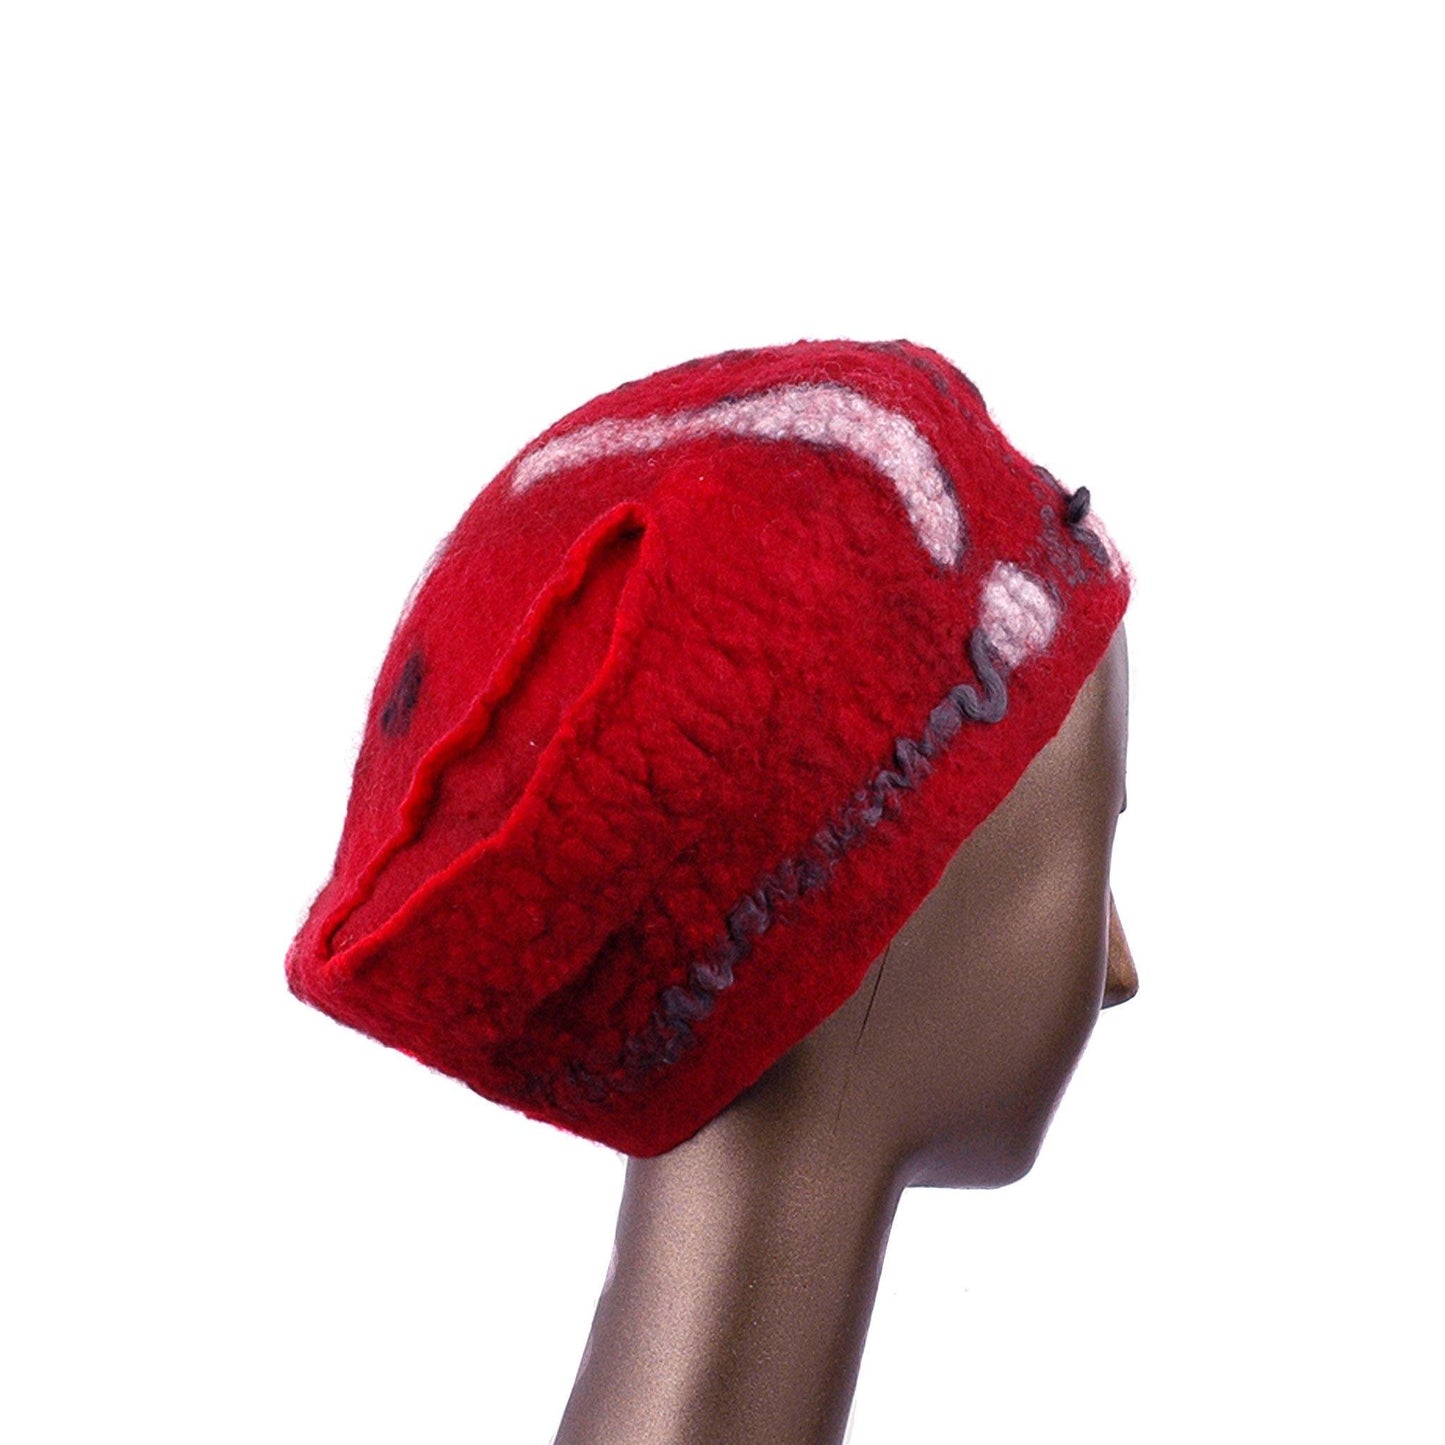 Russian Constructivist Inspired Red and Black Felted Beret - side view